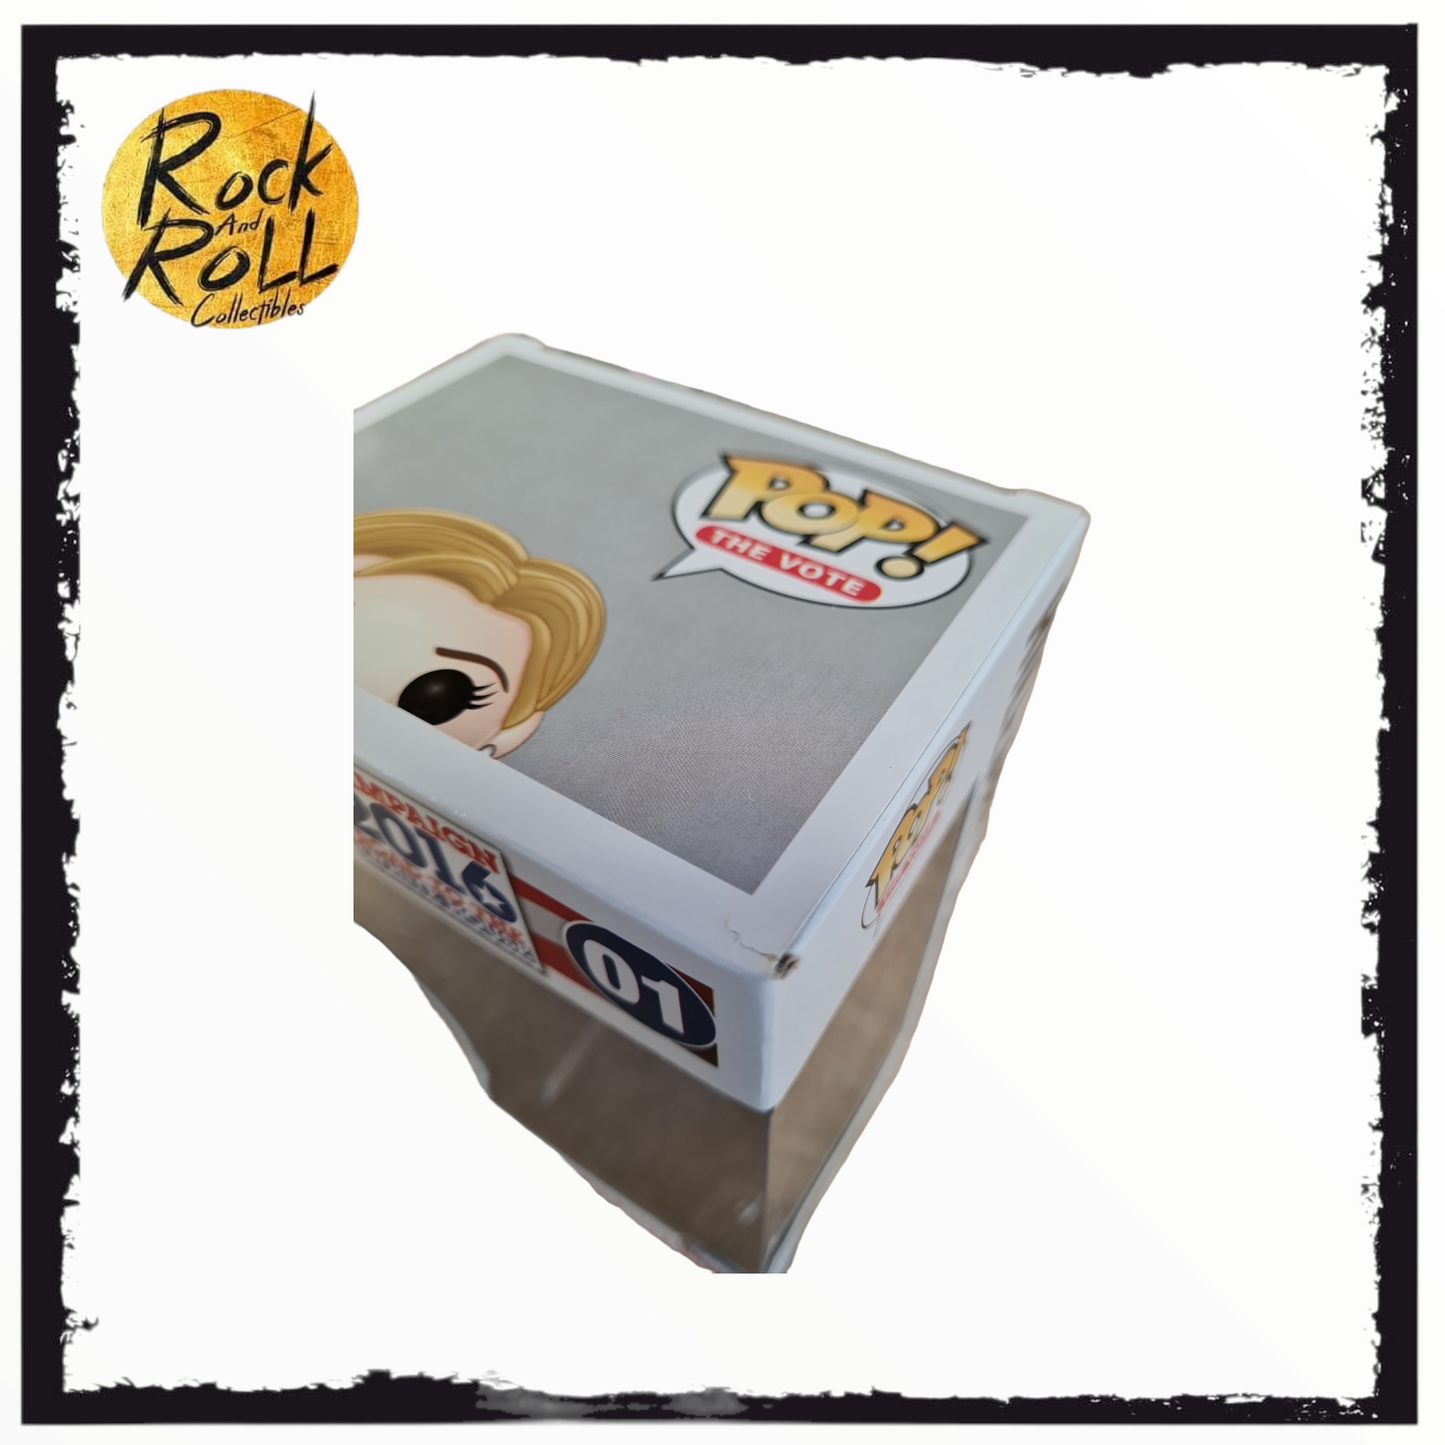 Campaign 2016 Road To The White House - Hillary Clinton Funko Pop! Vinyl #01